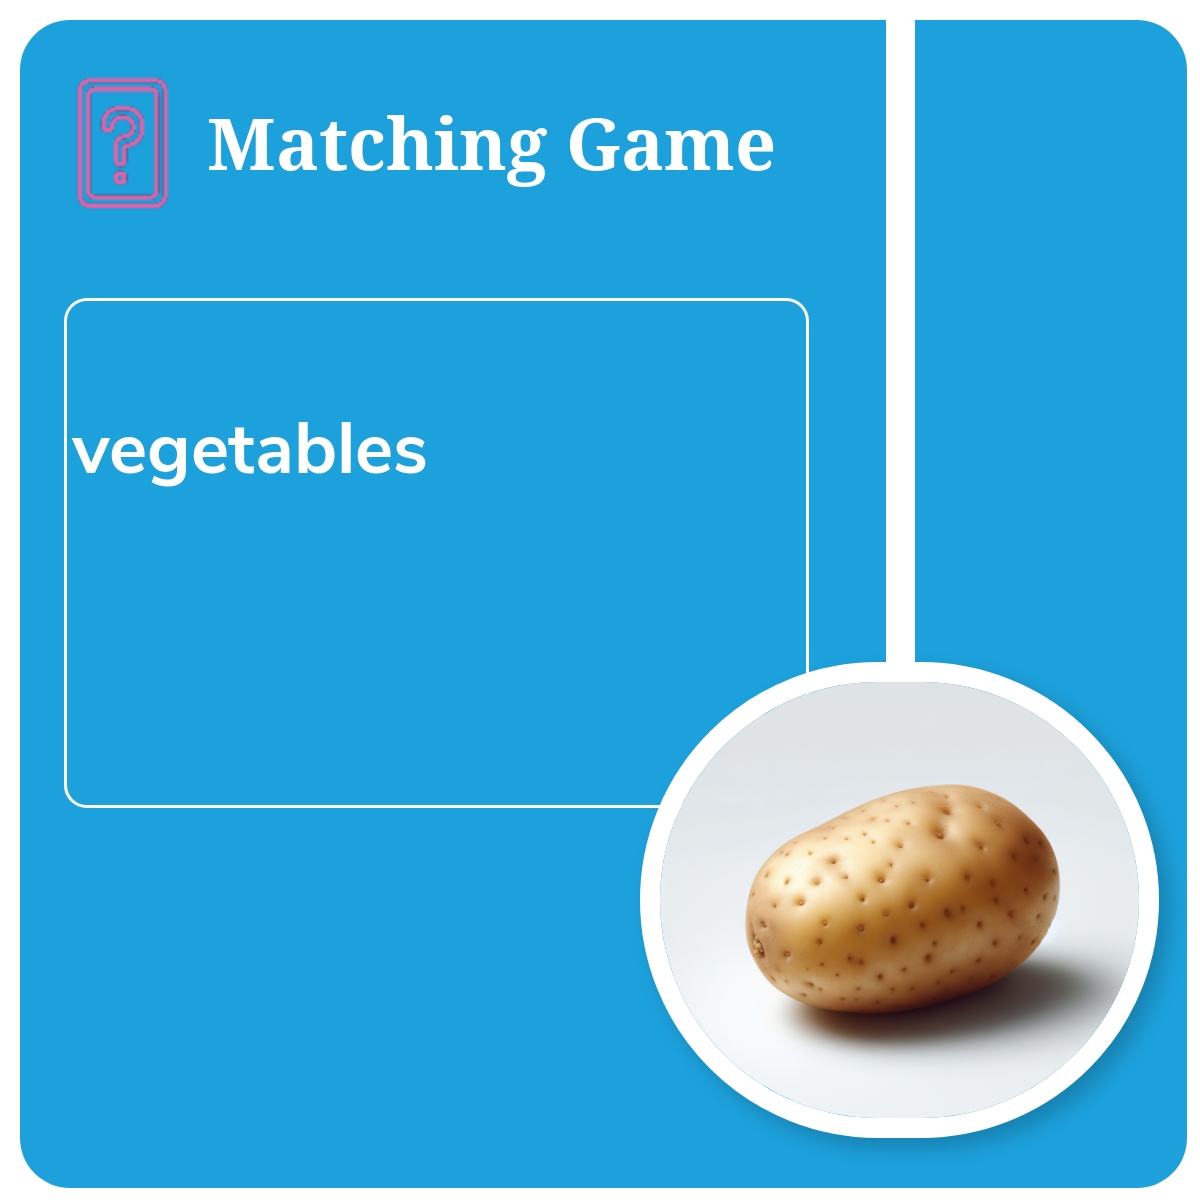 Matching Pictures to Definitions: vegetables